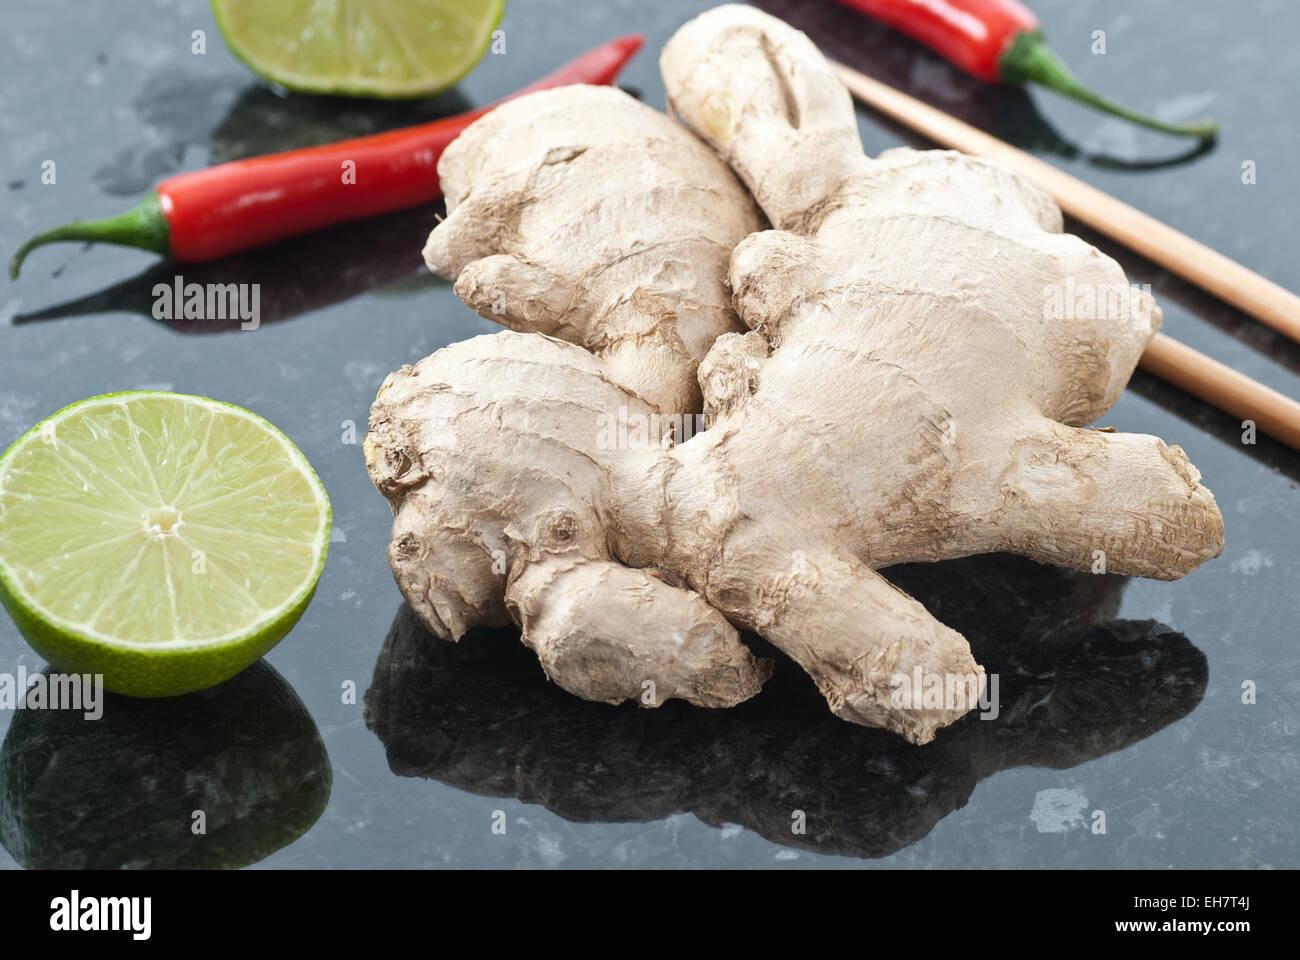 Fresh ginger together with lime, red chili and chopsticks. Stock Photo